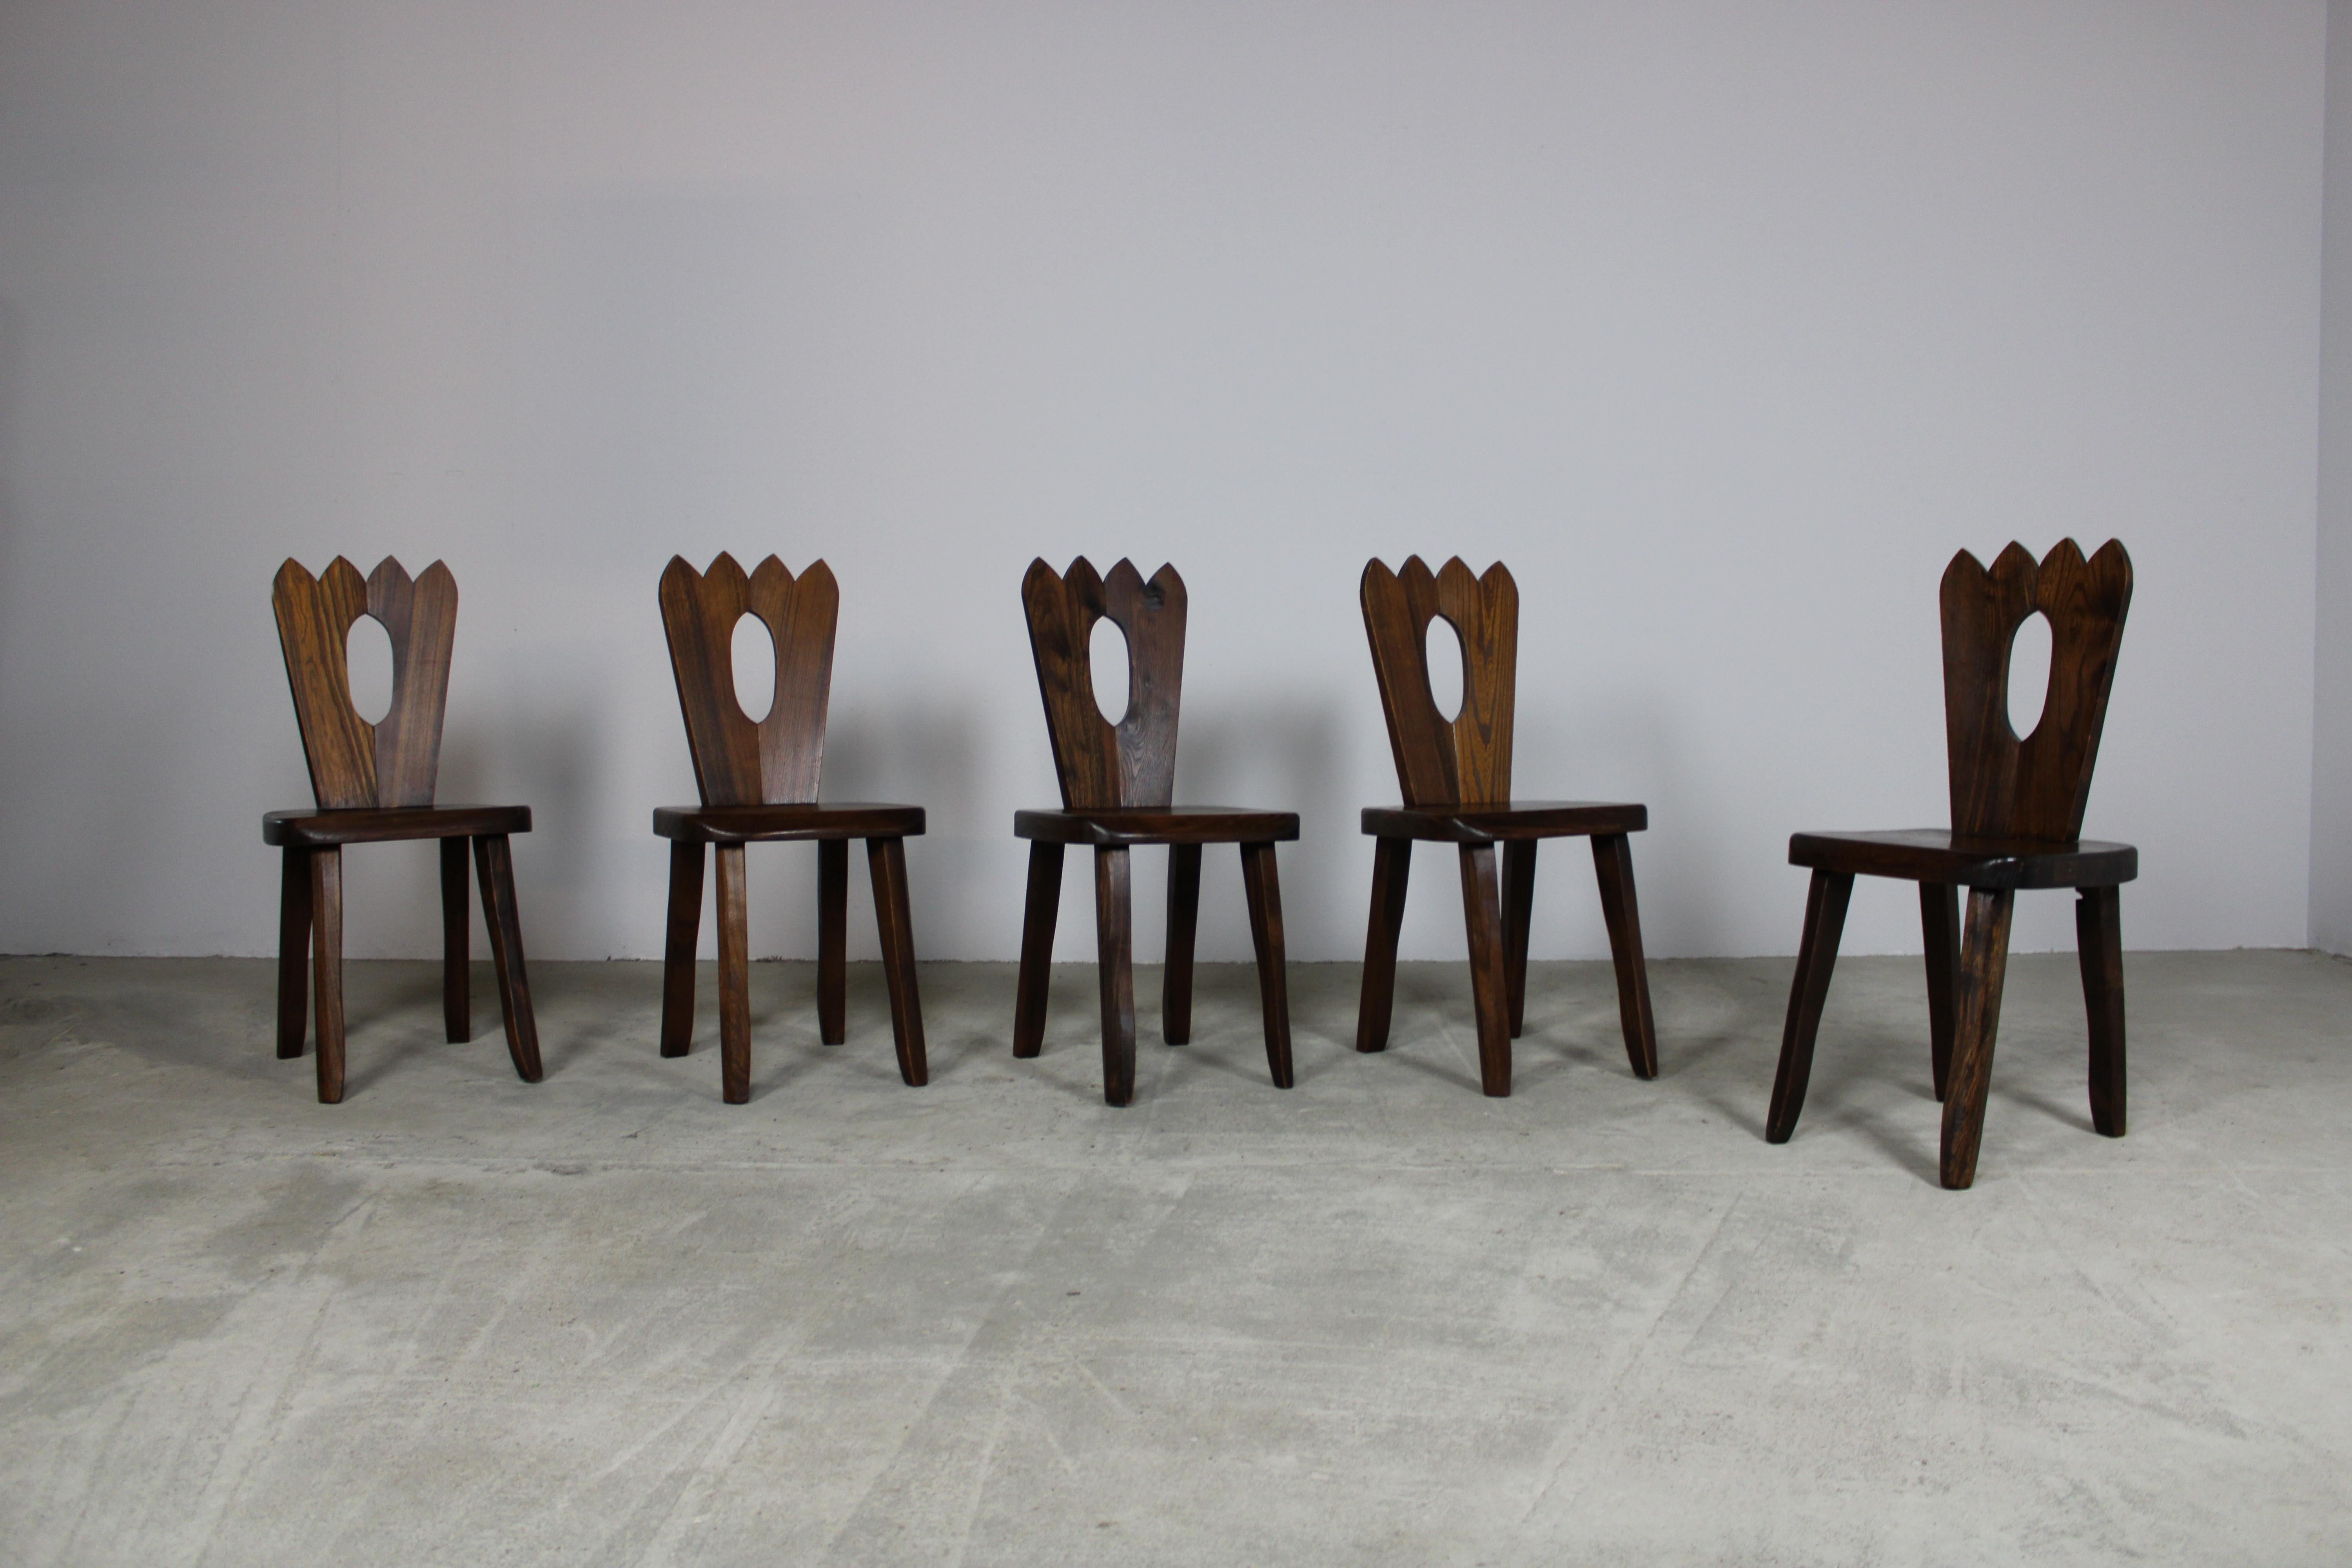 These dining chairs stand as a testament to timeless beauty, blending classic elegance with natural allure. Crafted from sturdy elm wood, these chairs exude a distinctive charm, characterized by the wood's attractive grain patterns, durability, and